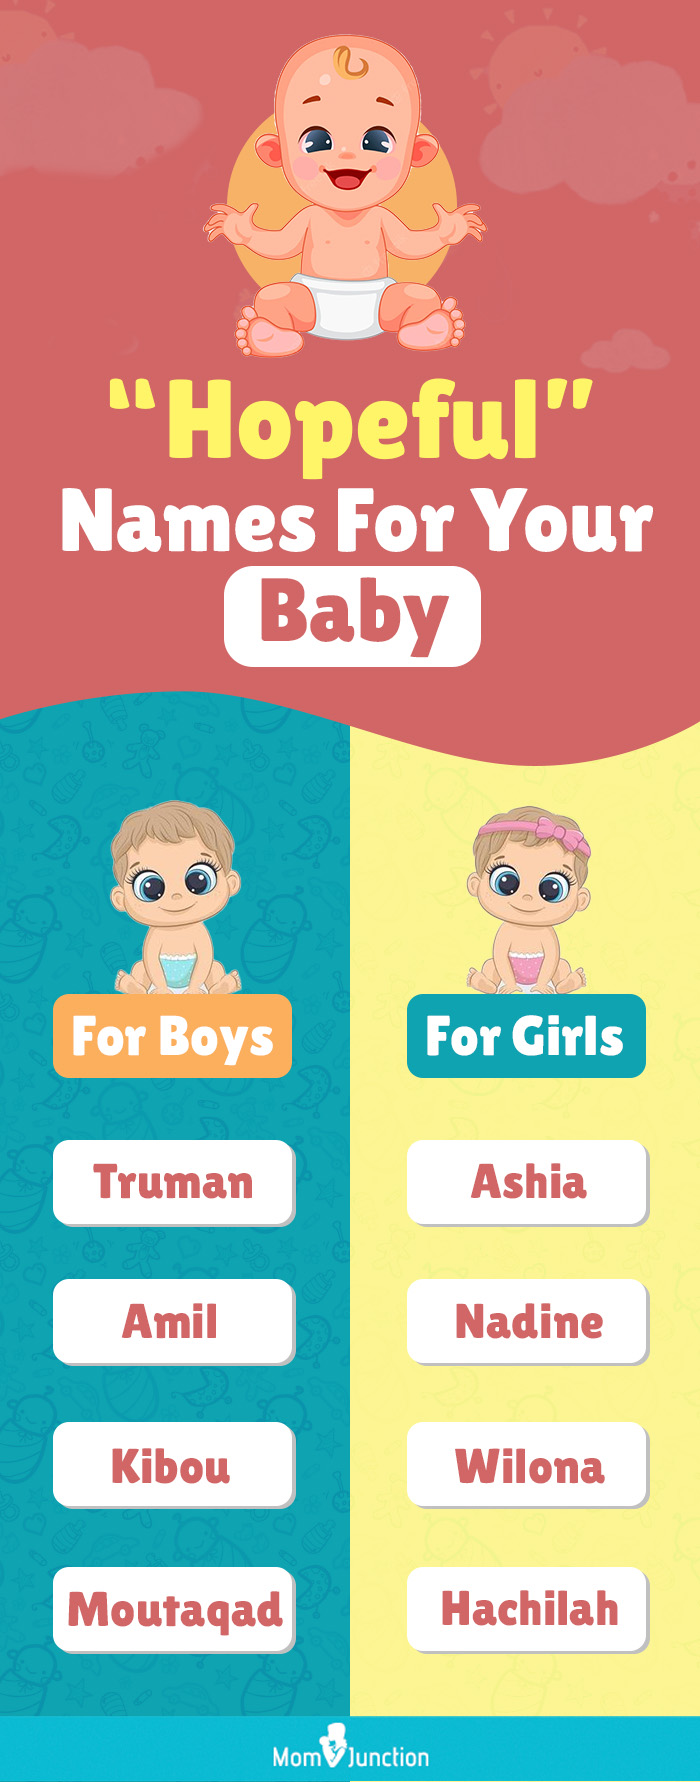 hopeful names for your baby (infographic)